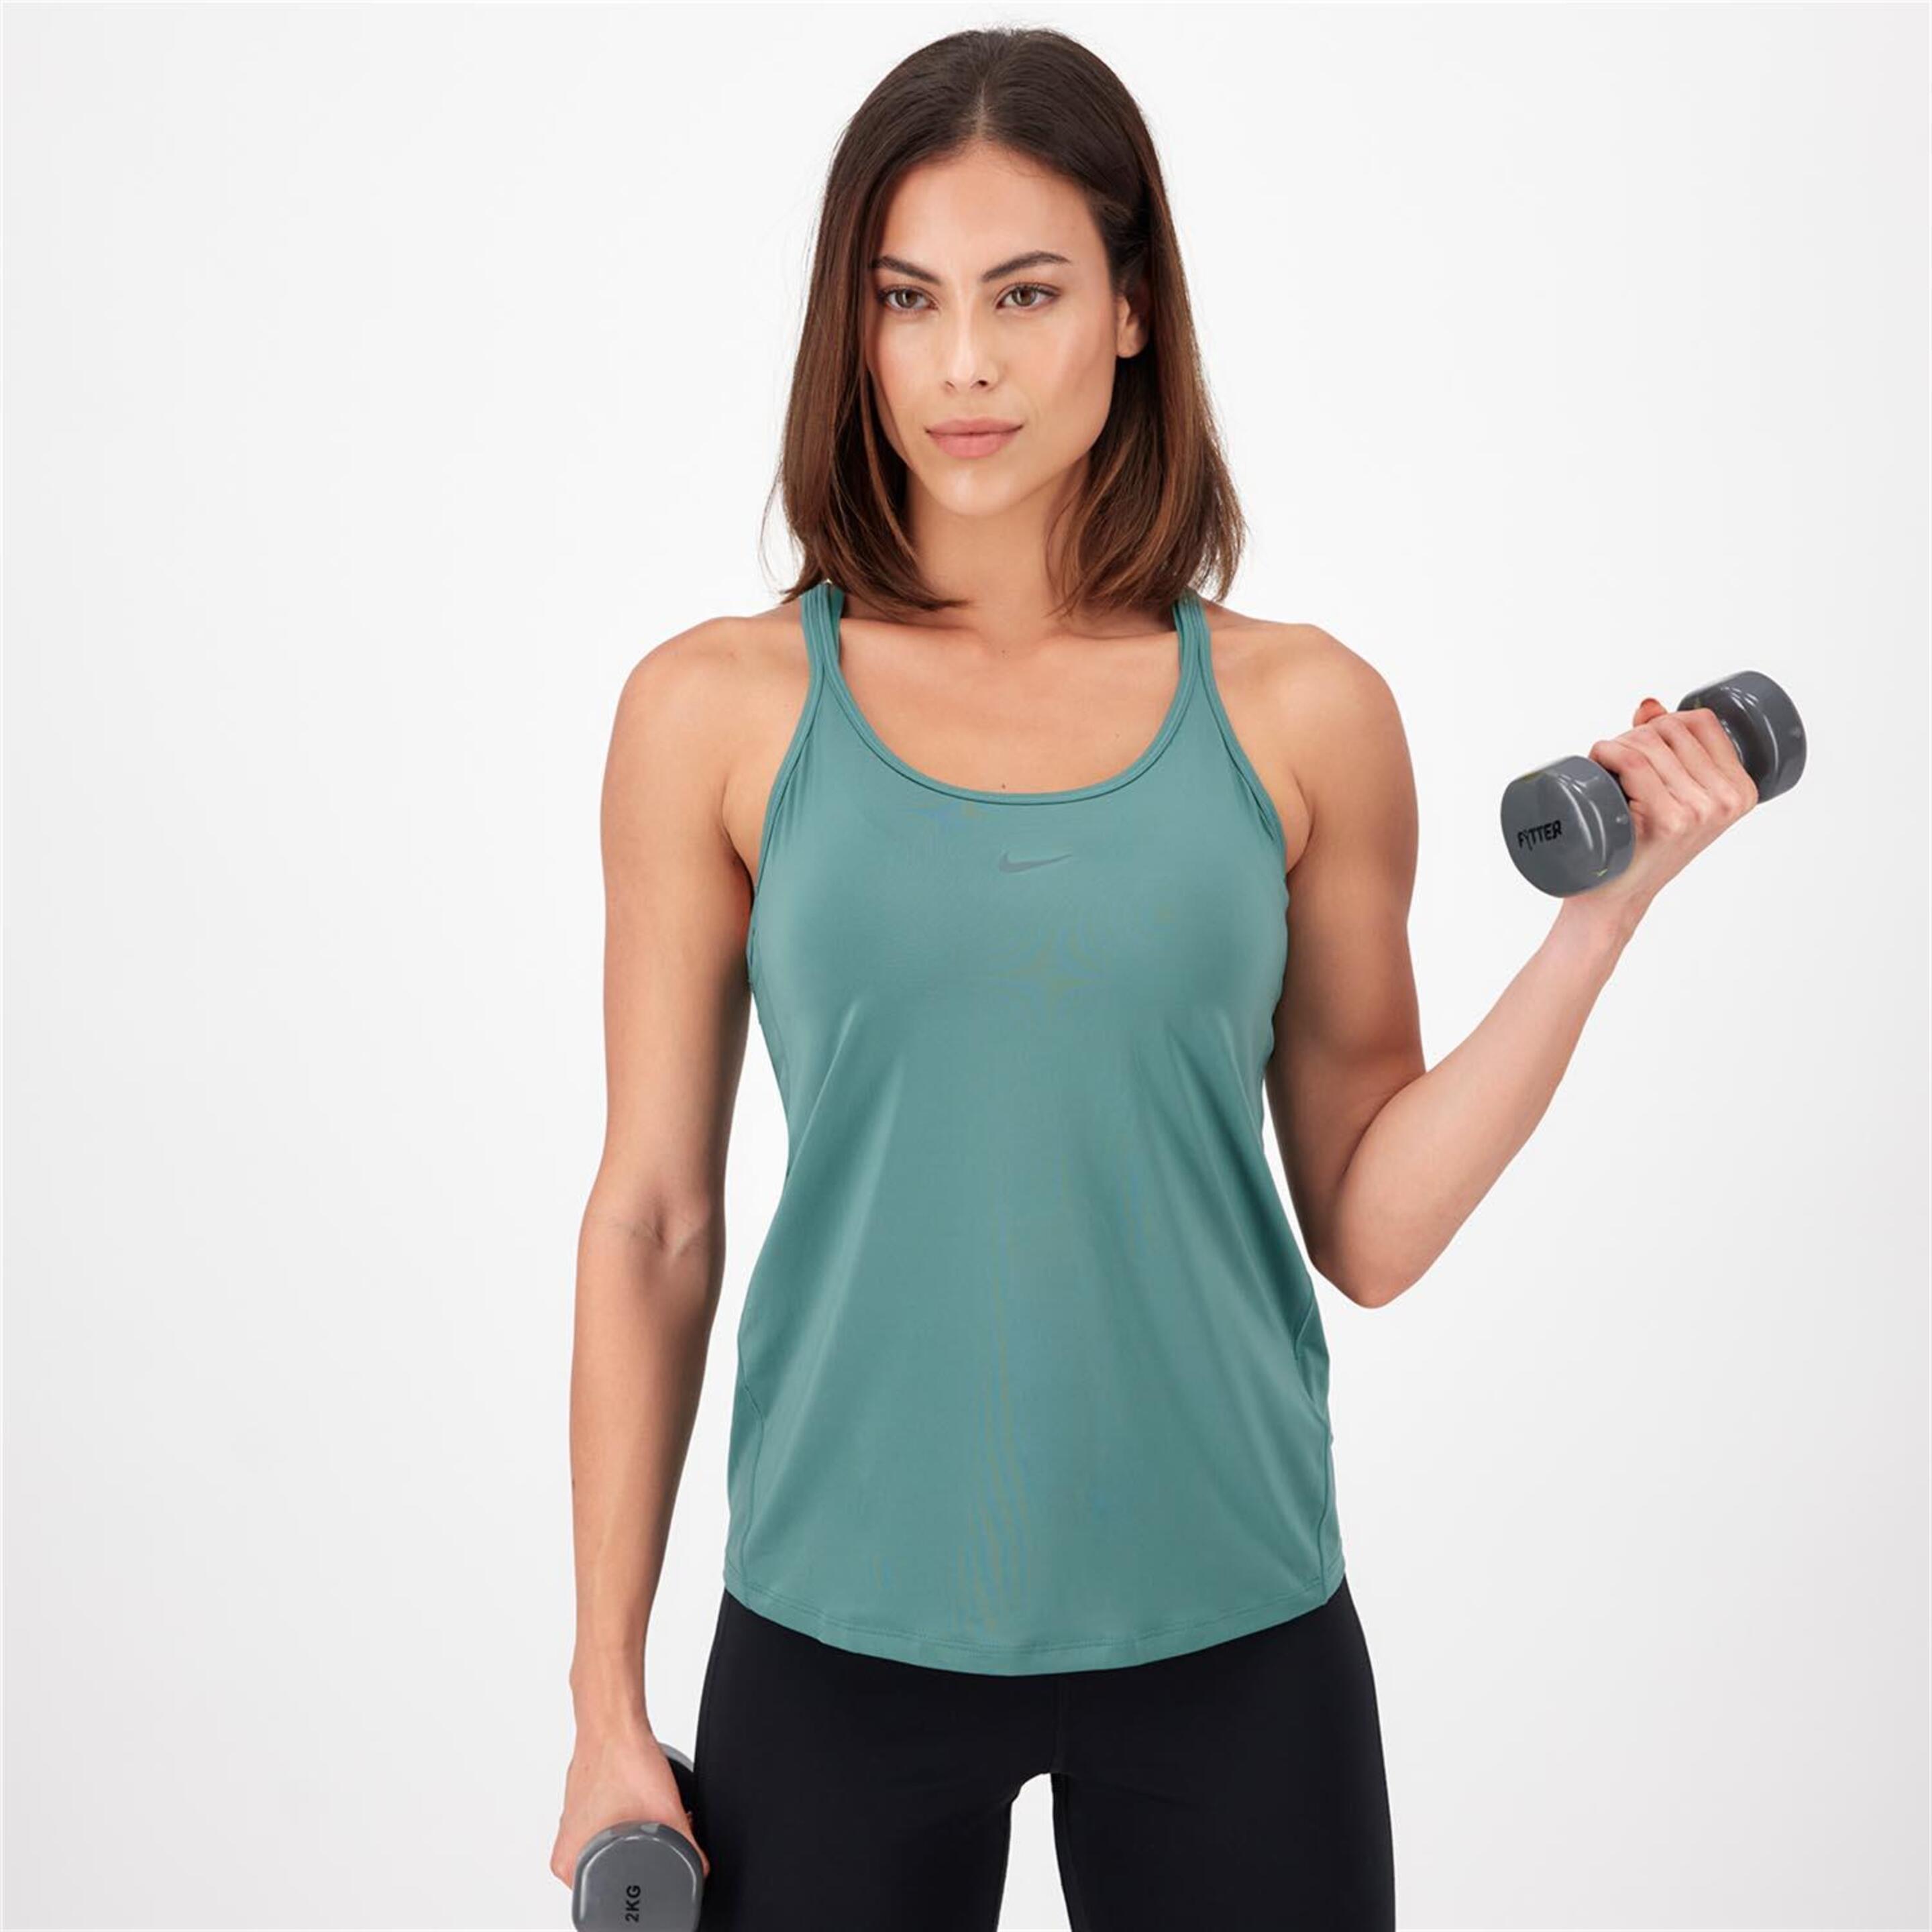 Nike One - verde - Camisola Fitness Mulher